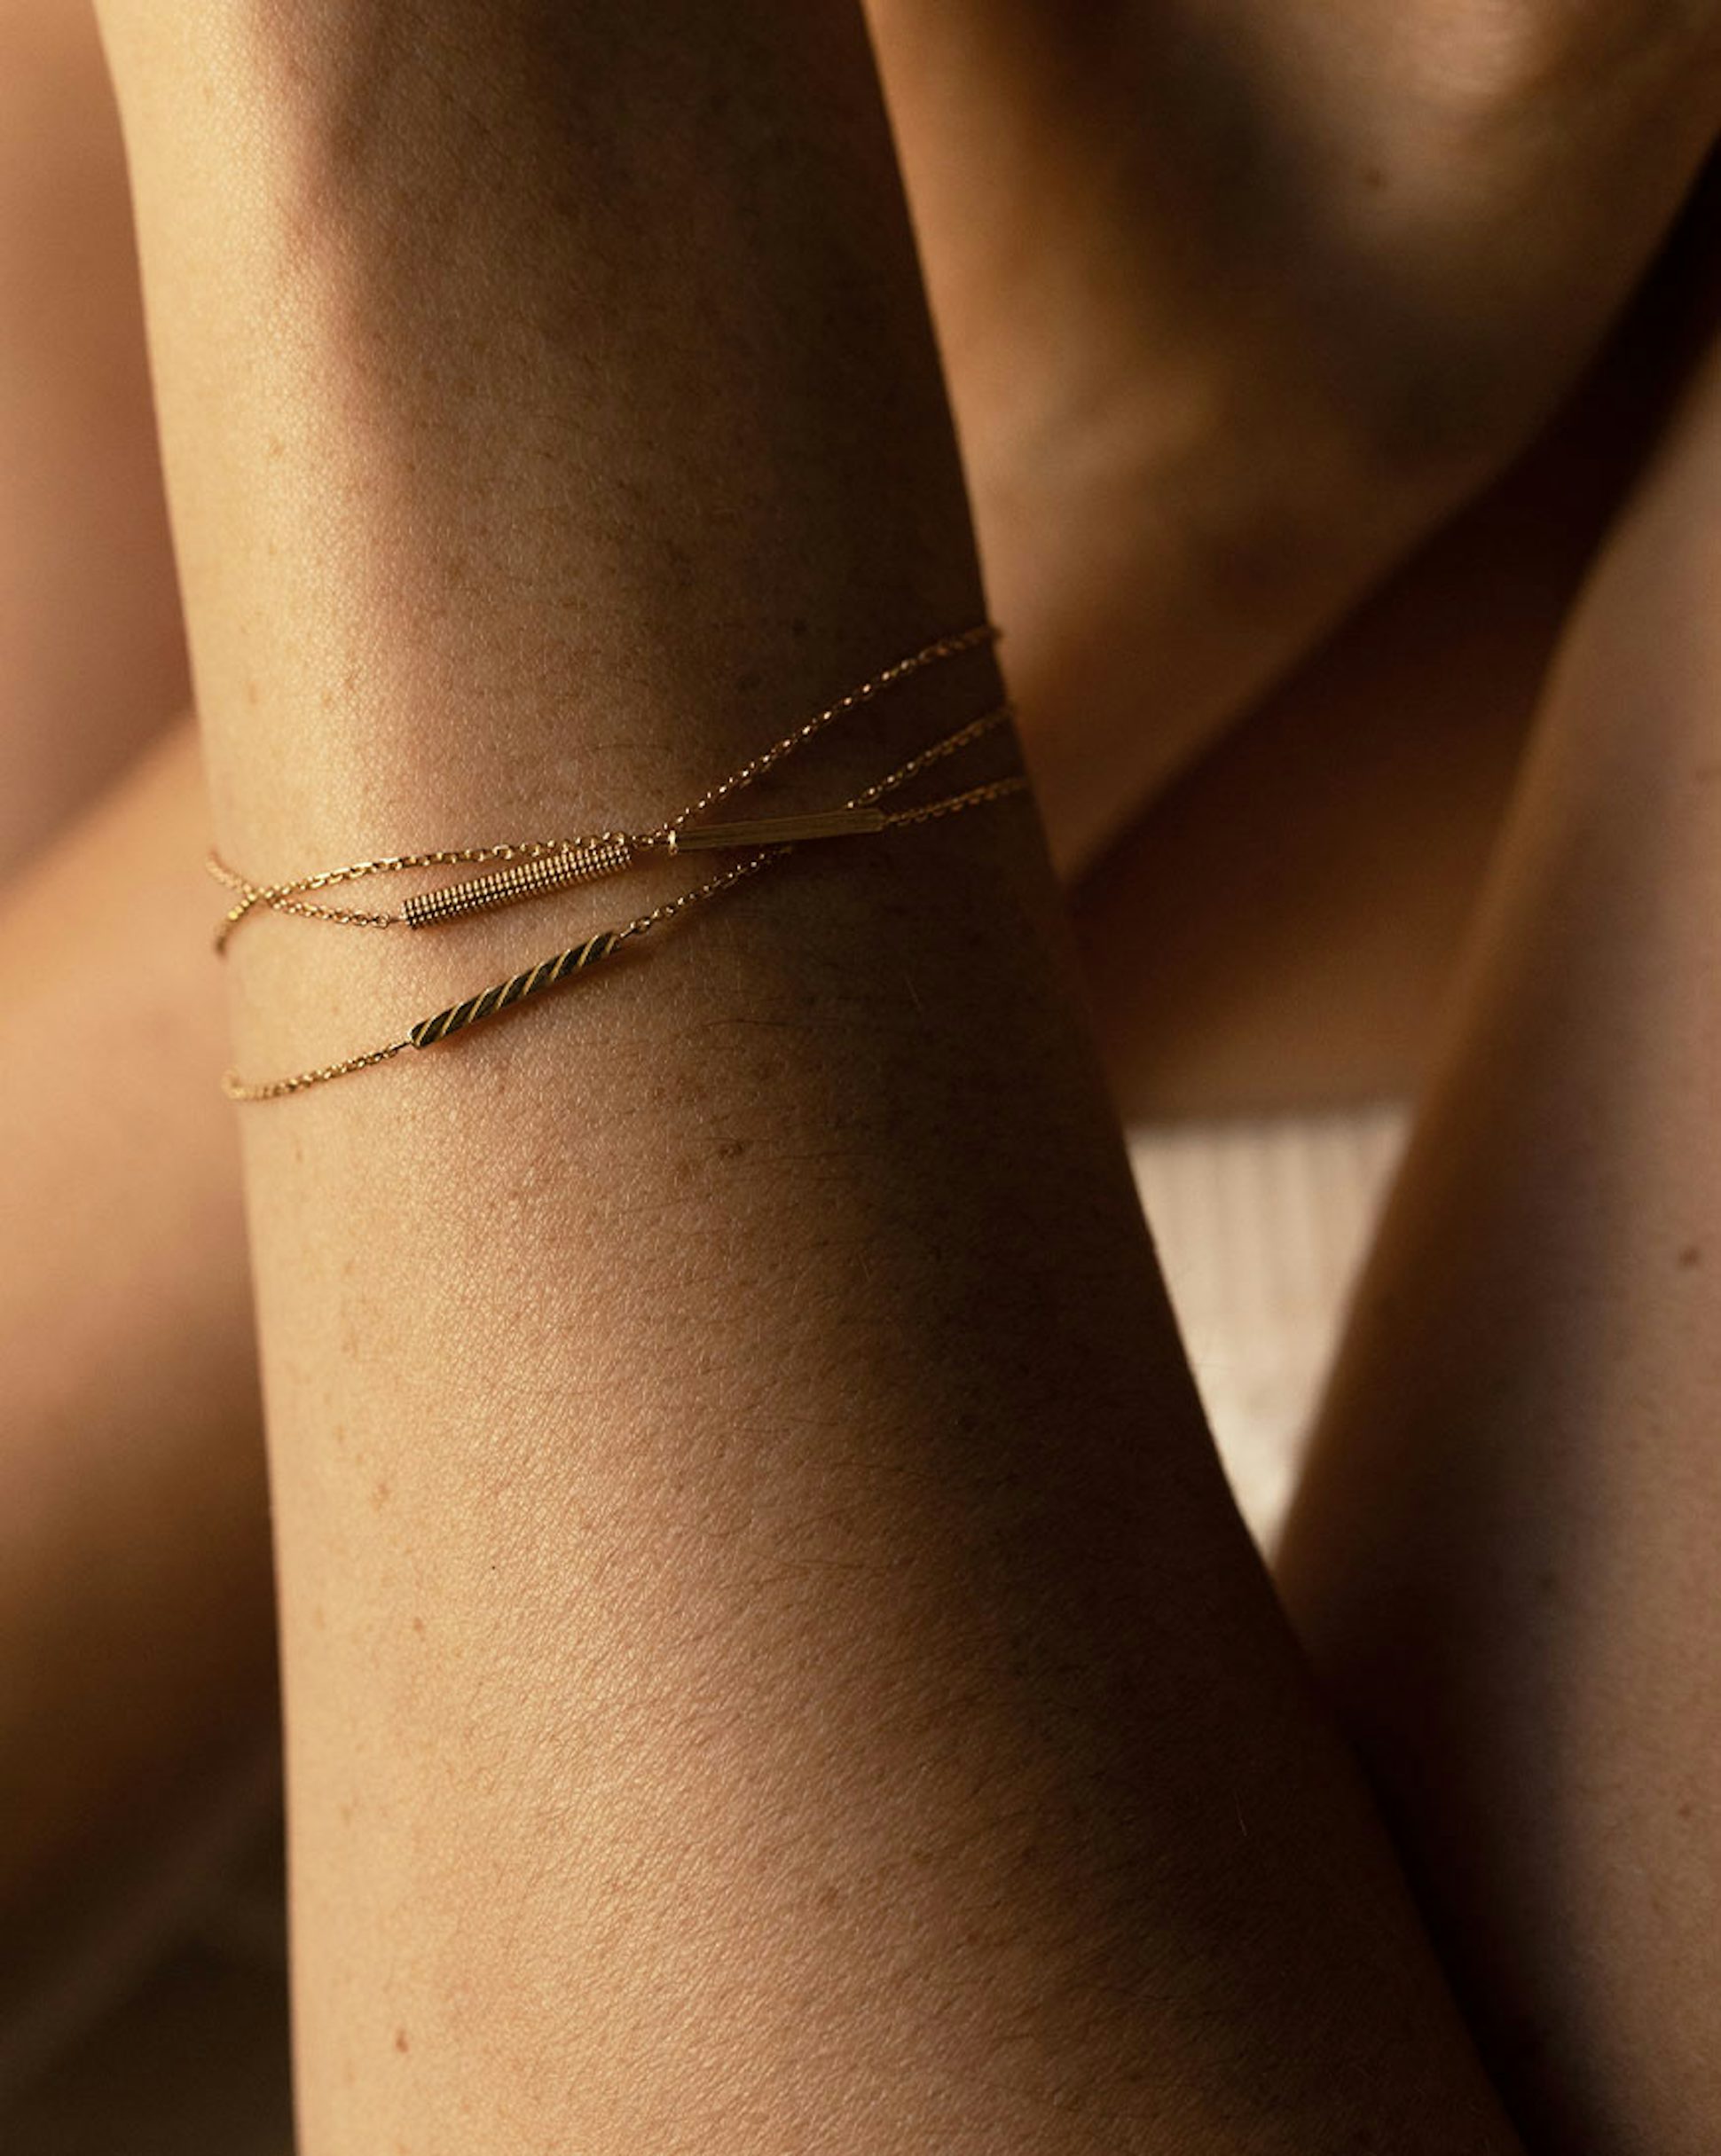 Anagramme Bracelets in Fairmined-certified ethical yellow gold paved | JEM Jewellery Ethically Minded 